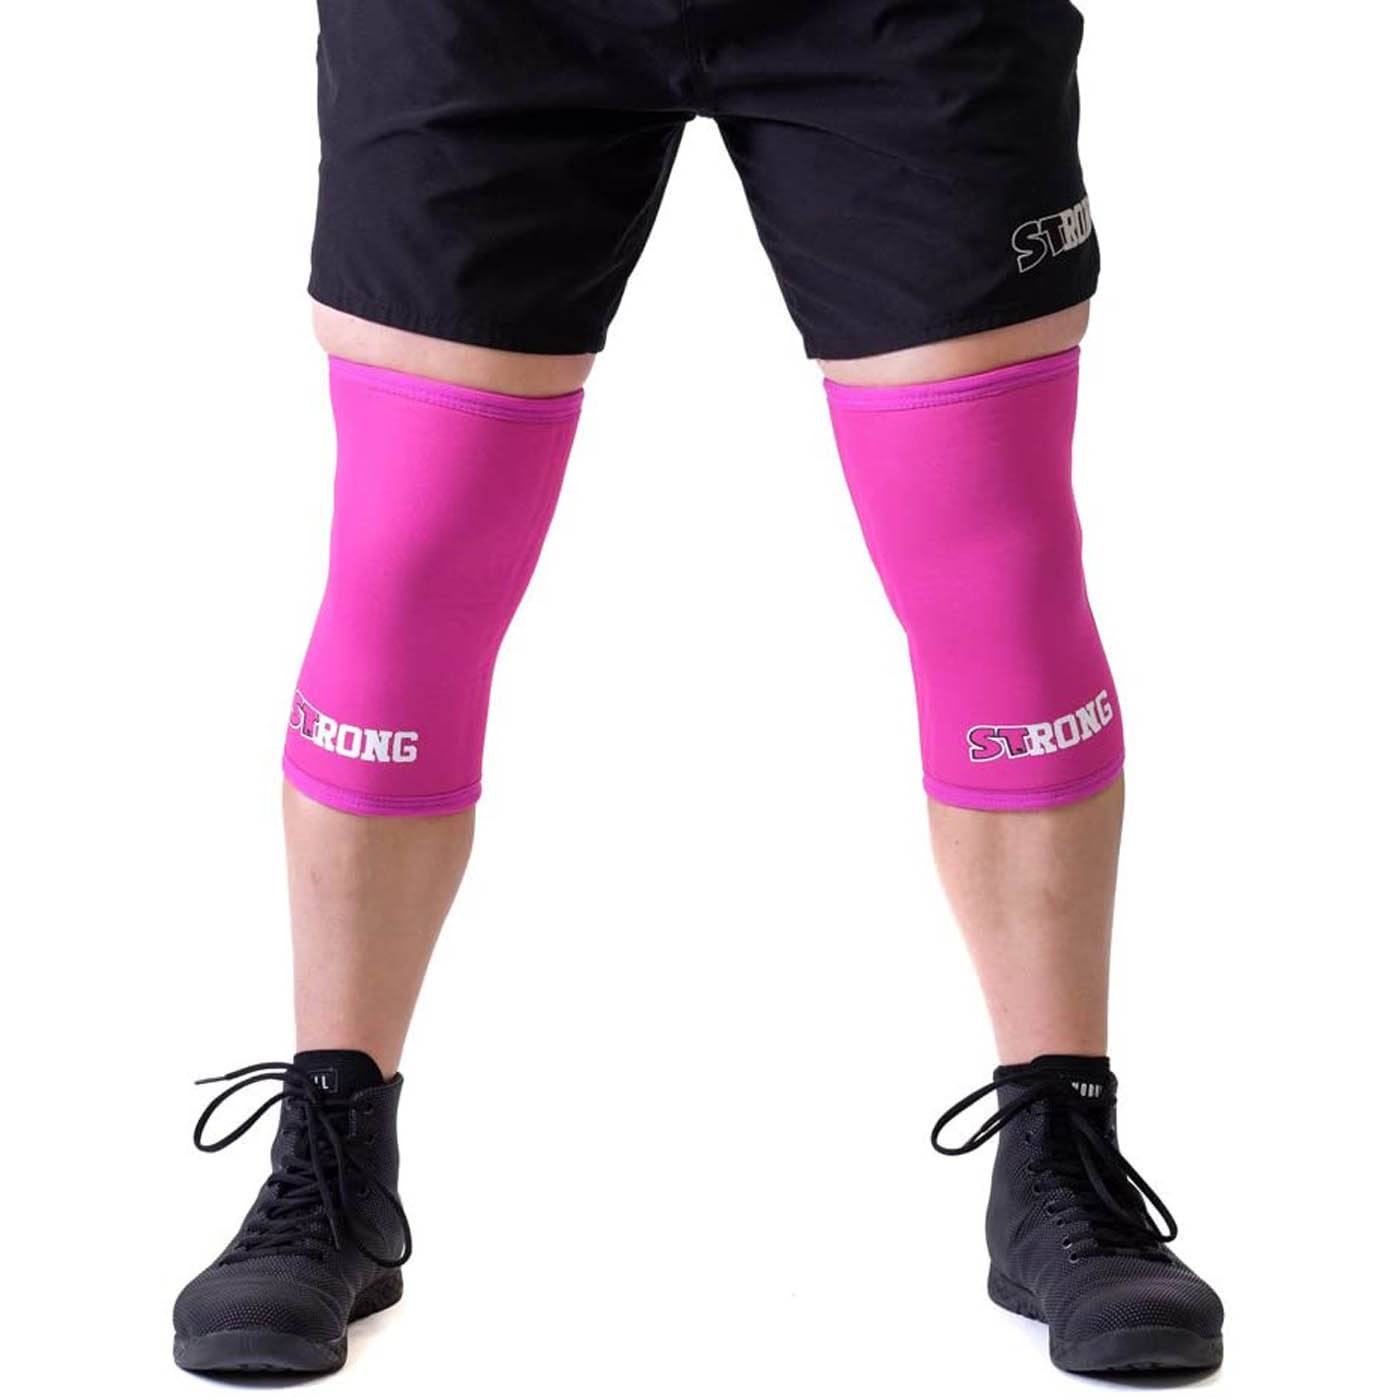 Sling Shot | STrong Knee Sleeves - XTC Fitness - Exercise Equipment Superstore - Canada - Knee Sleeve